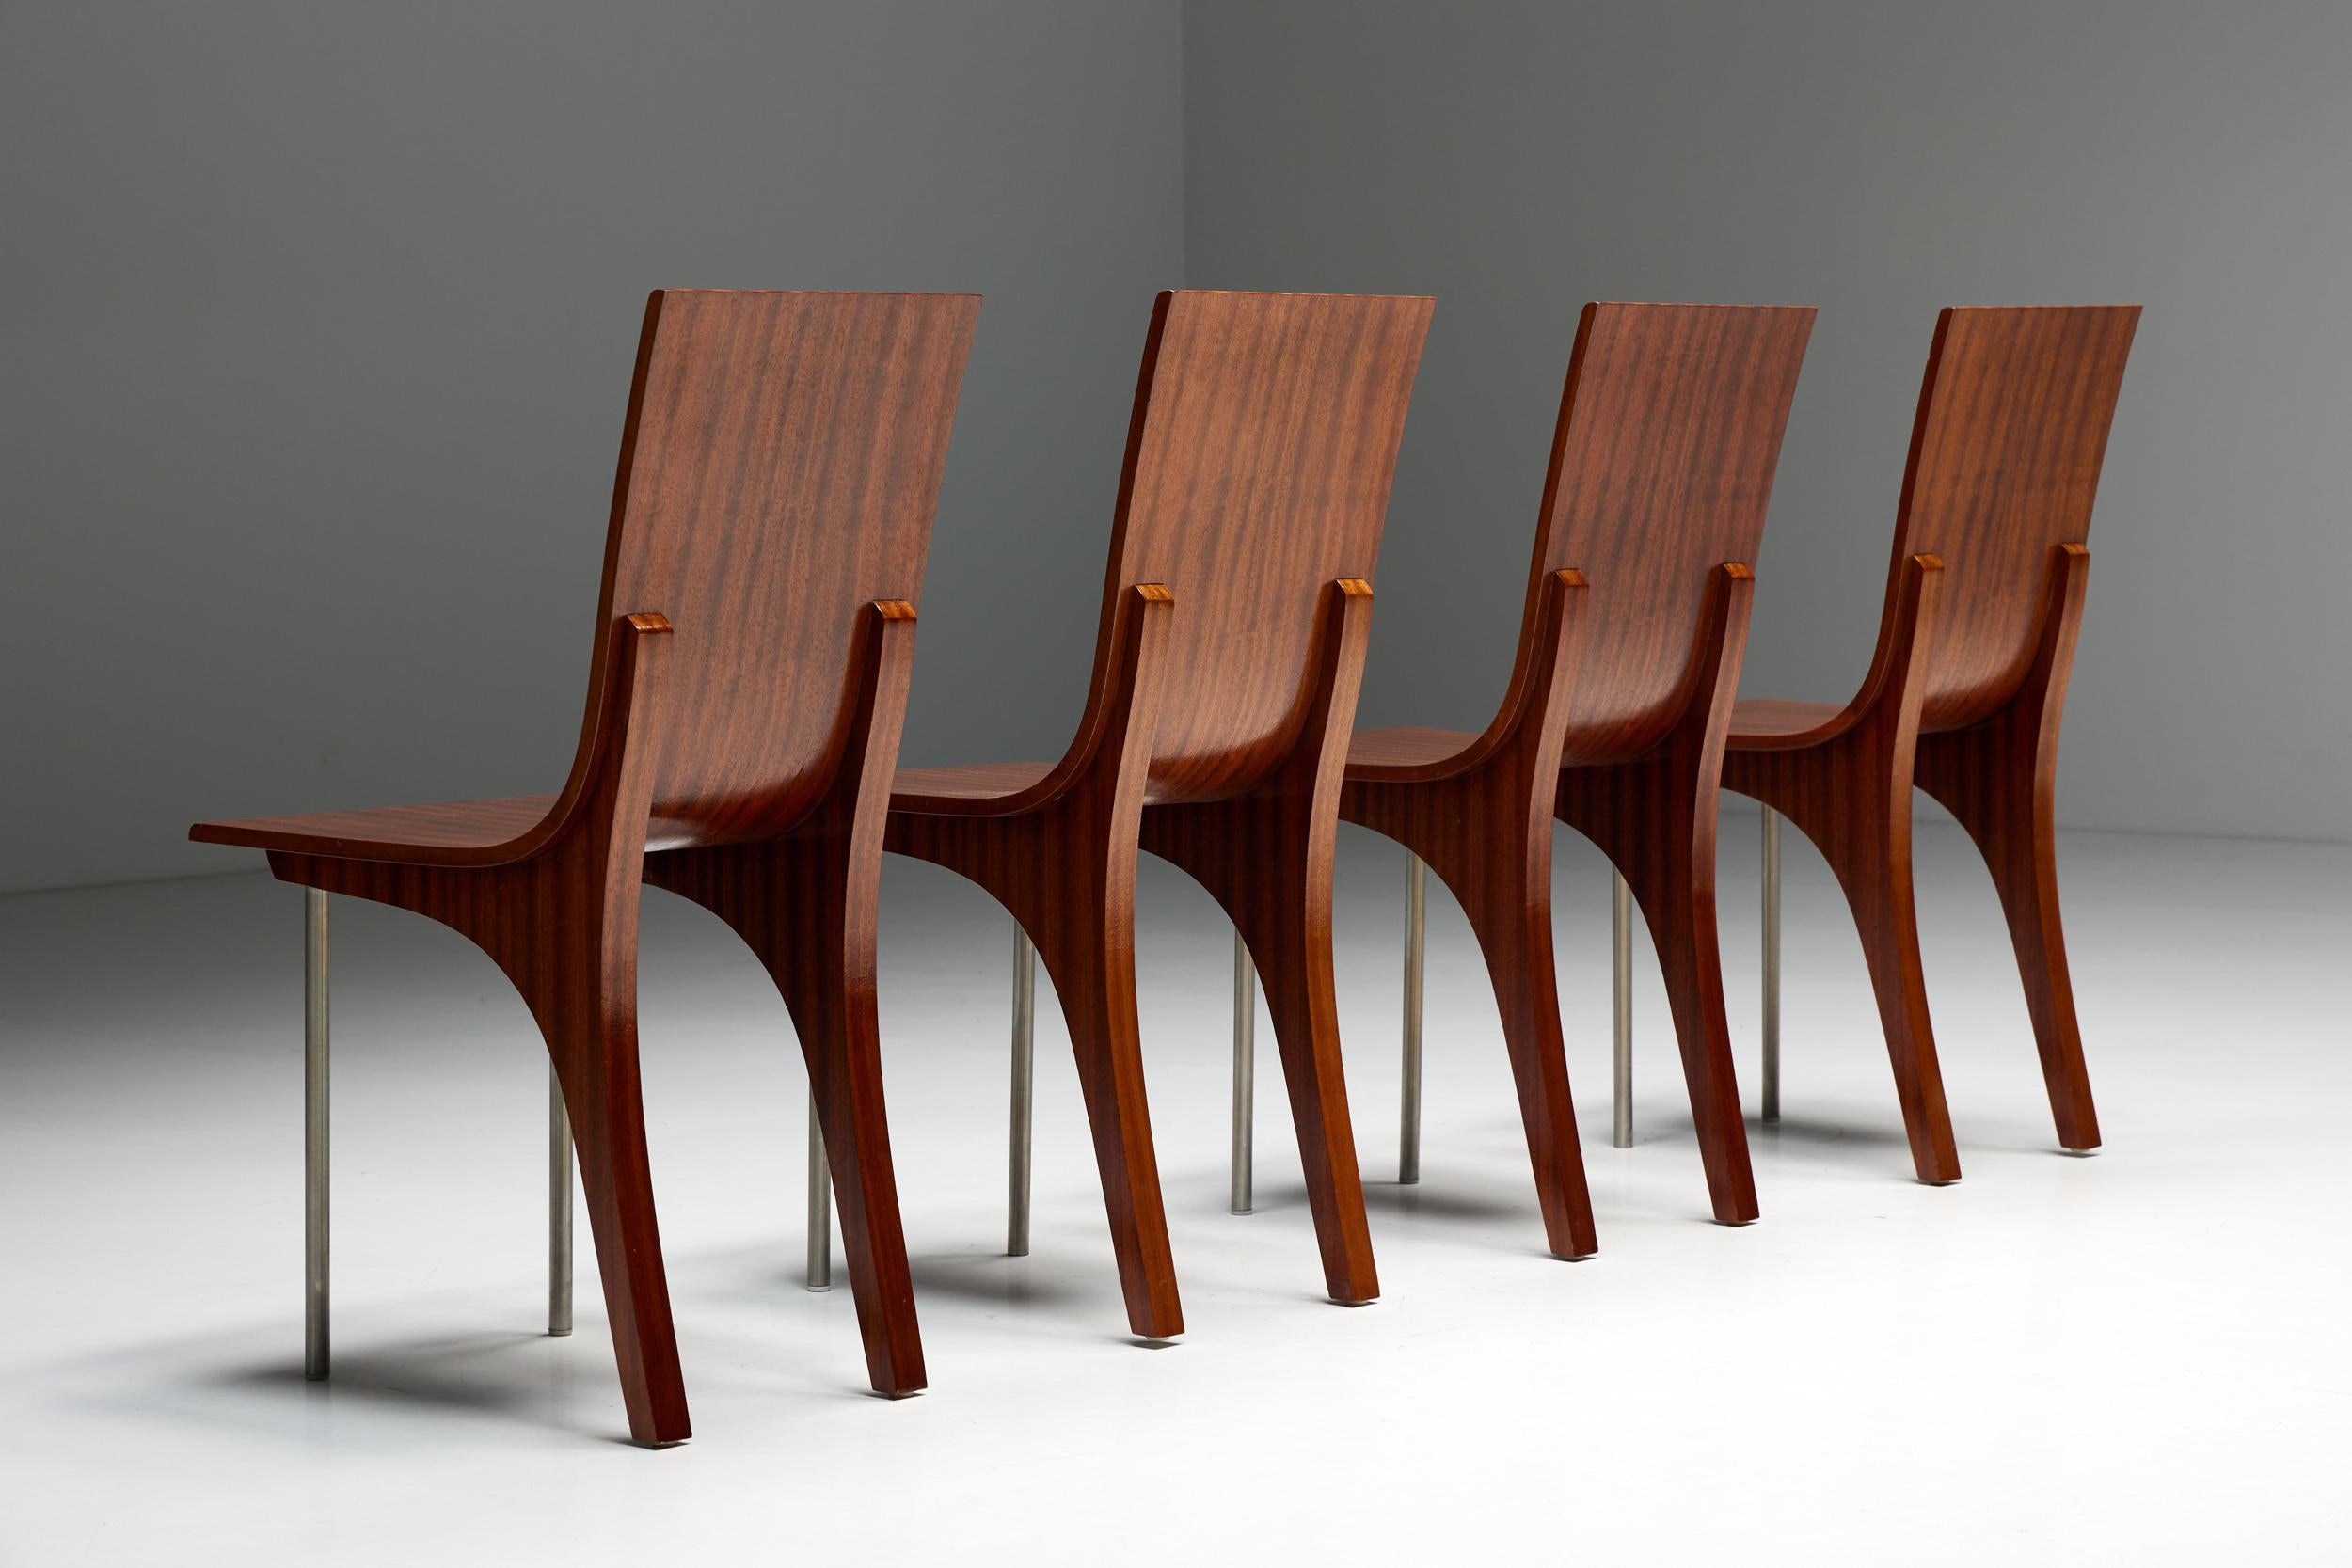 Italian Postmodern Walnut Dining Chairs, Italy, 1980s For Sale